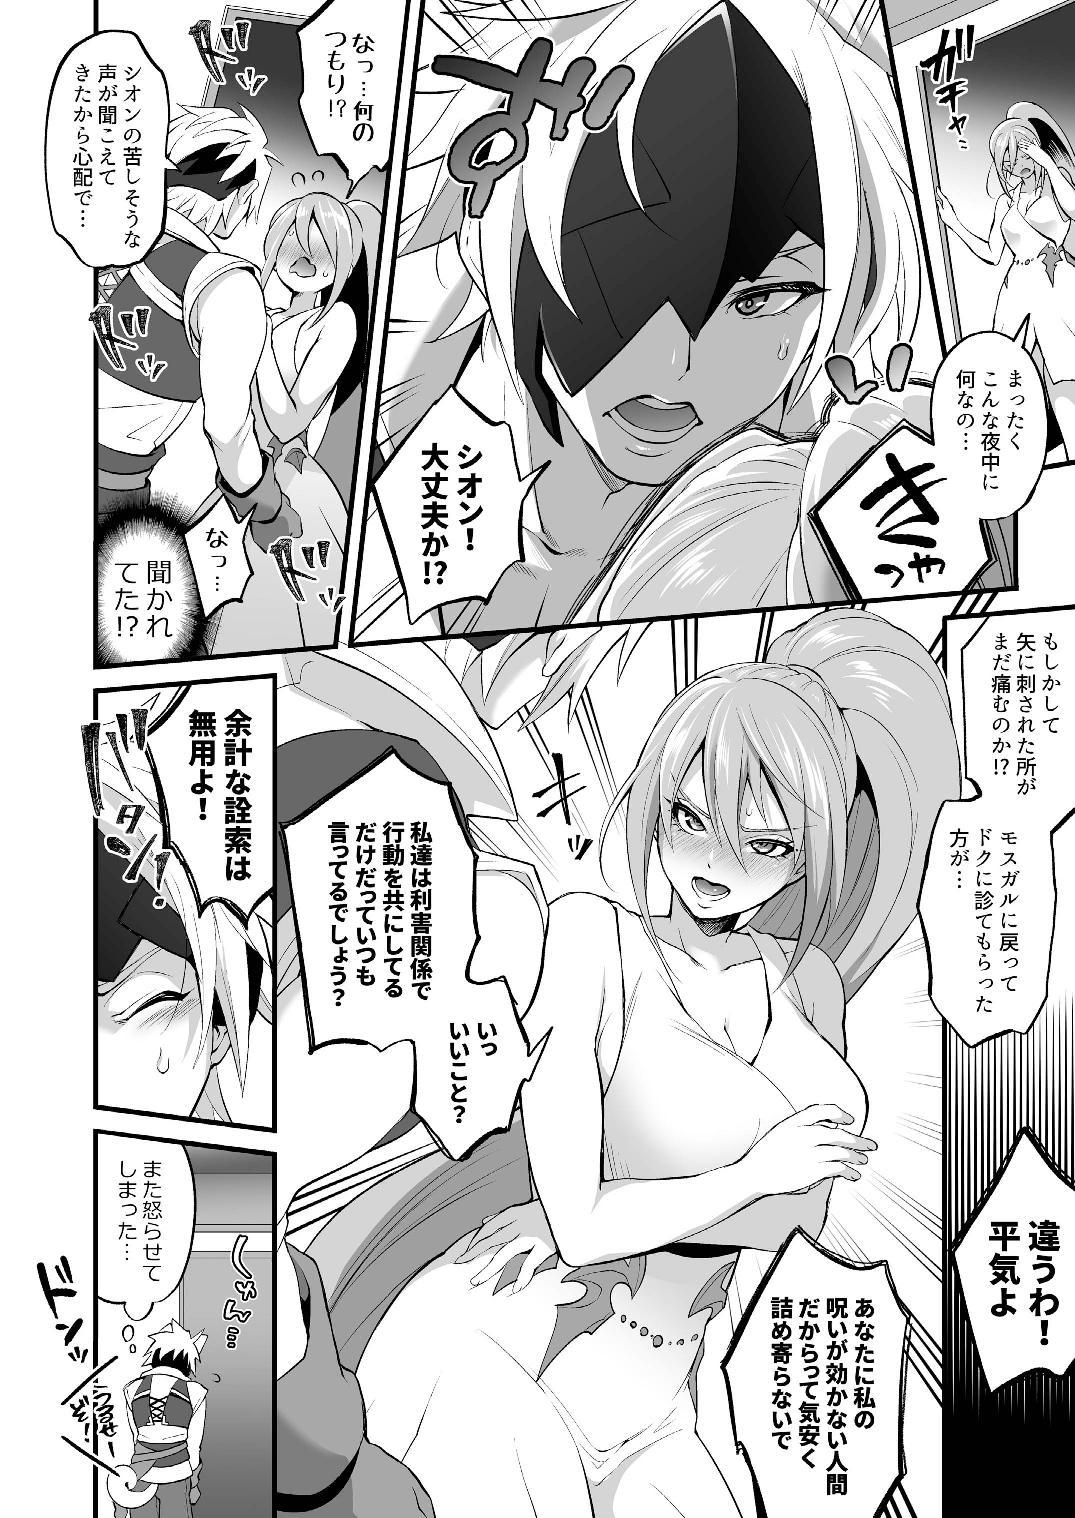 Lesbiansex 私に詰め寄ると〇〇〇がイくわよ…! - Tales of arise Deflowered - Page 8